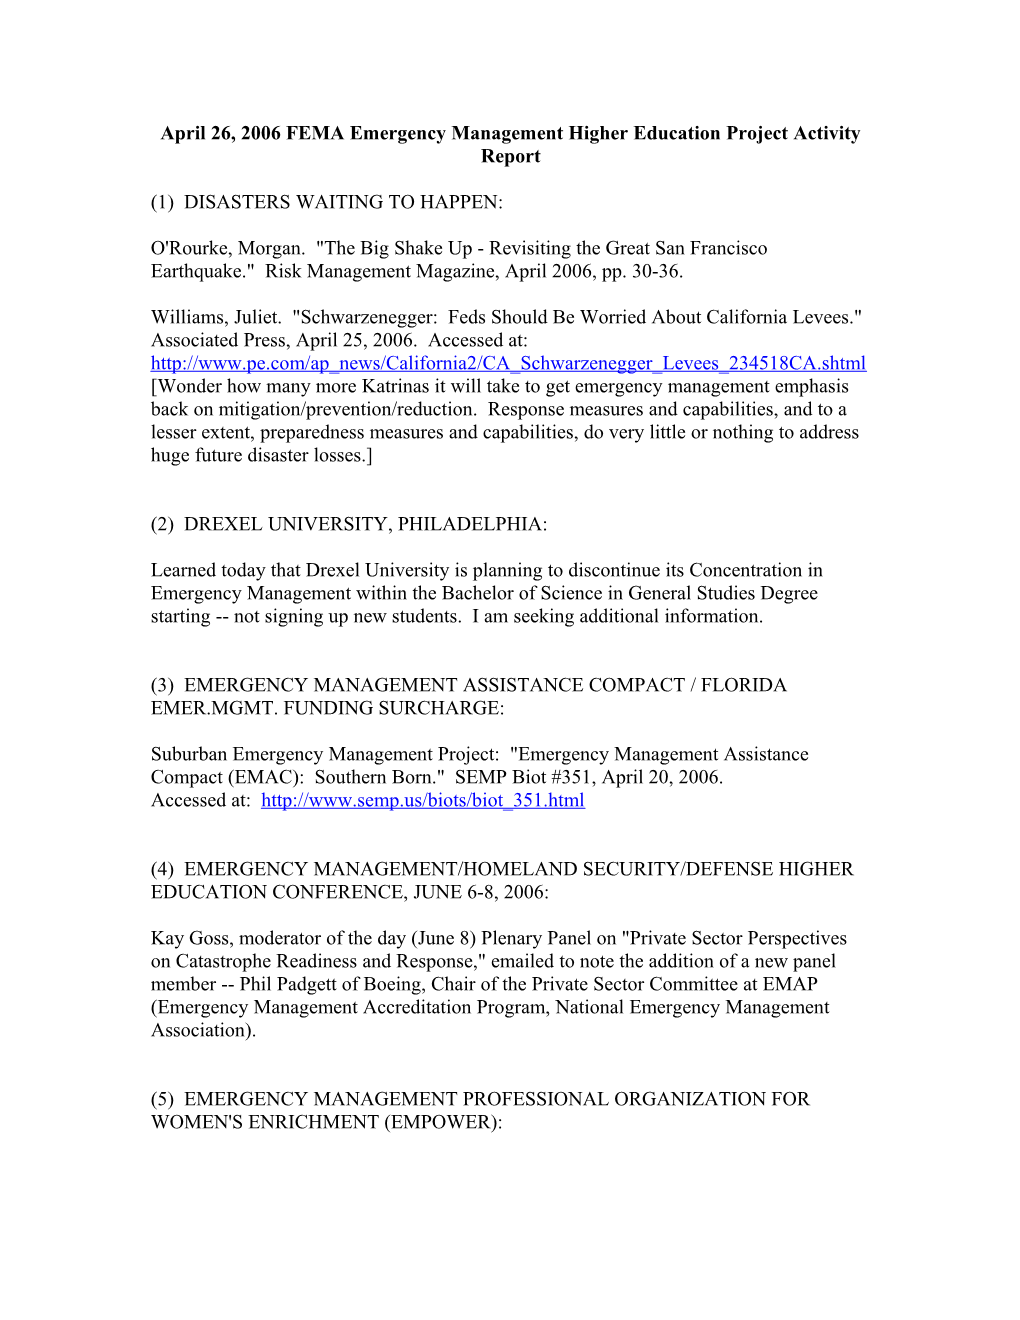 April 26, 2006 FEMA Emergency Management Higher Education Project Activity Report